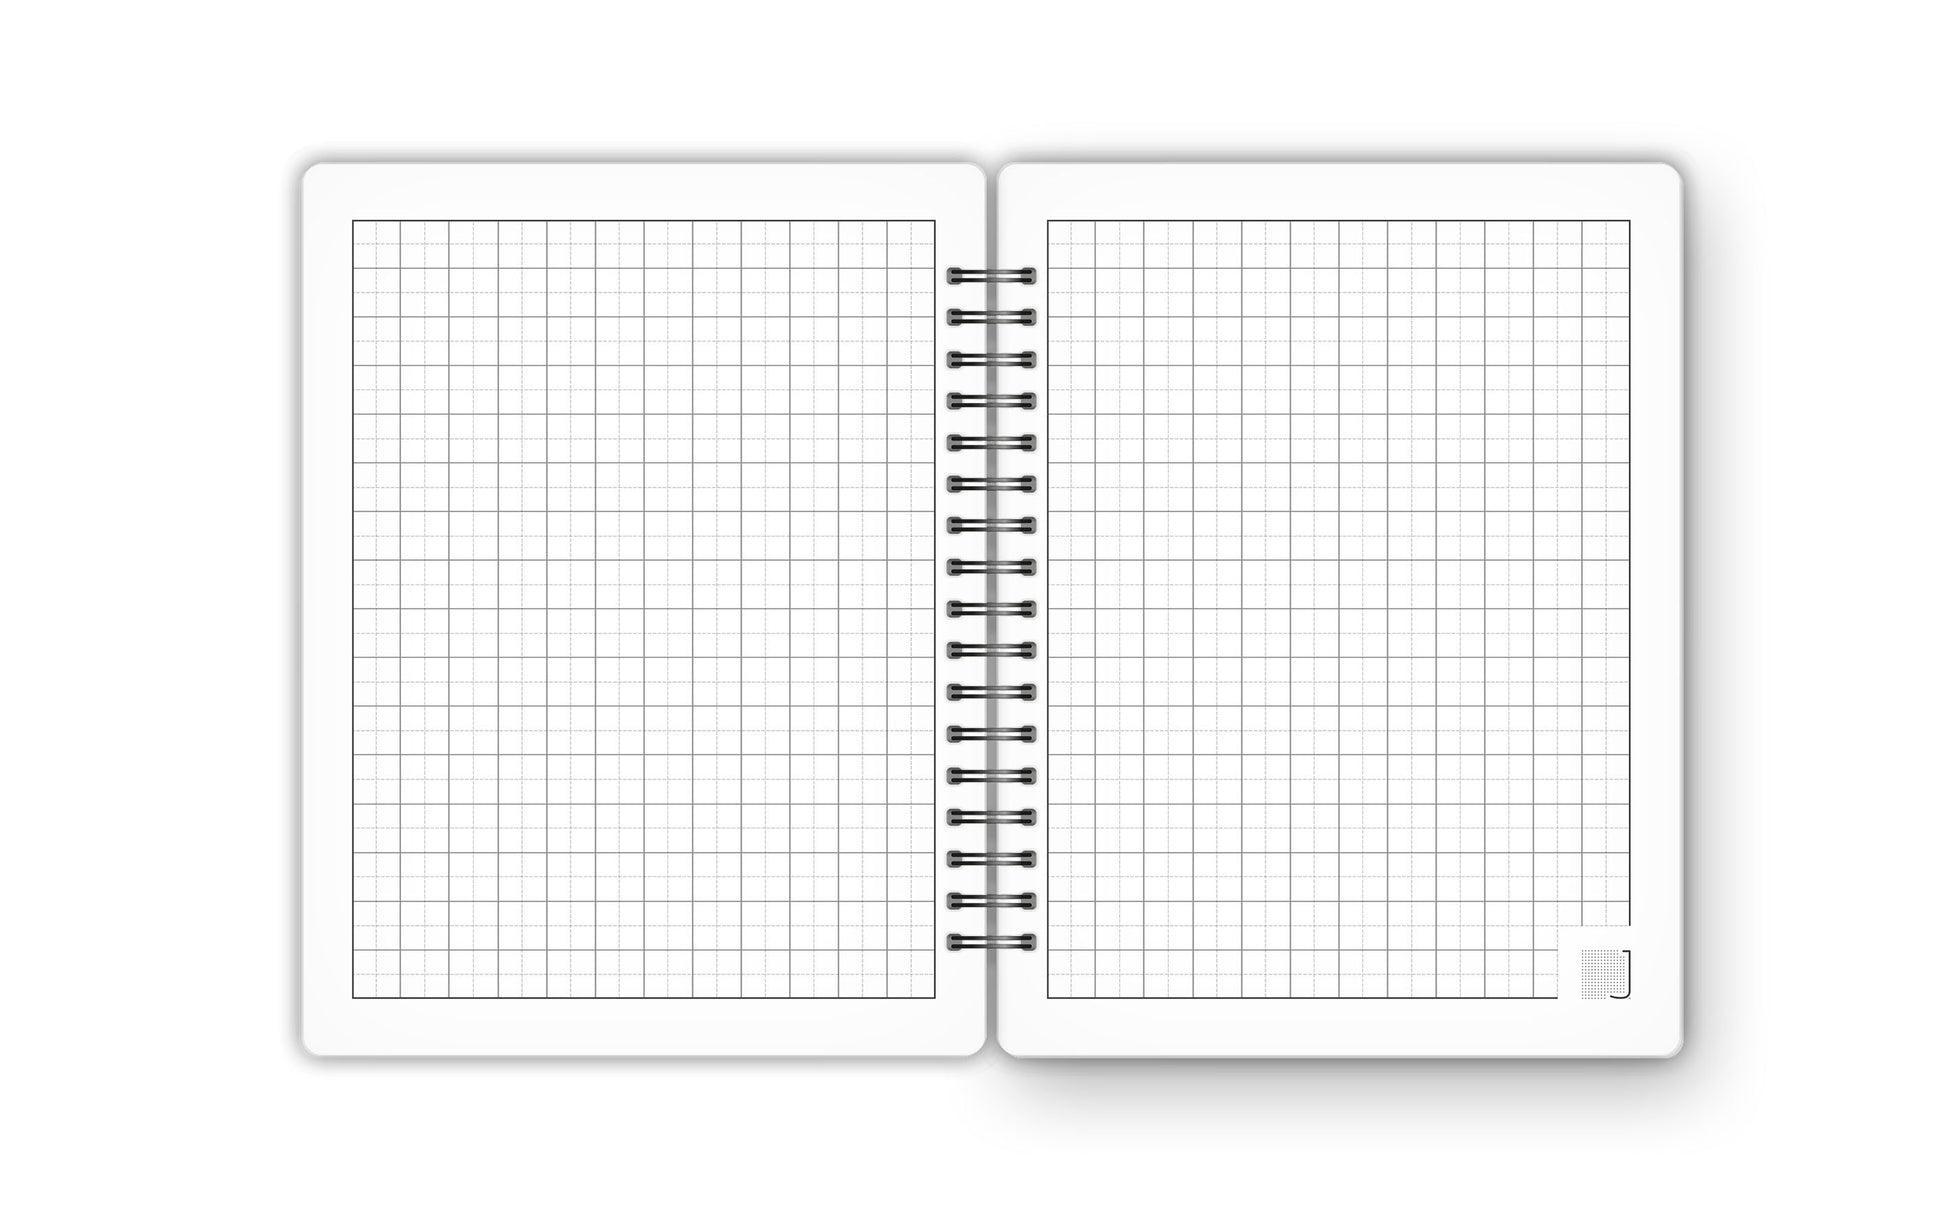 Square Grid - 18X14 cm - 75 Sheets | Minimal Leaf 01 - from Journals